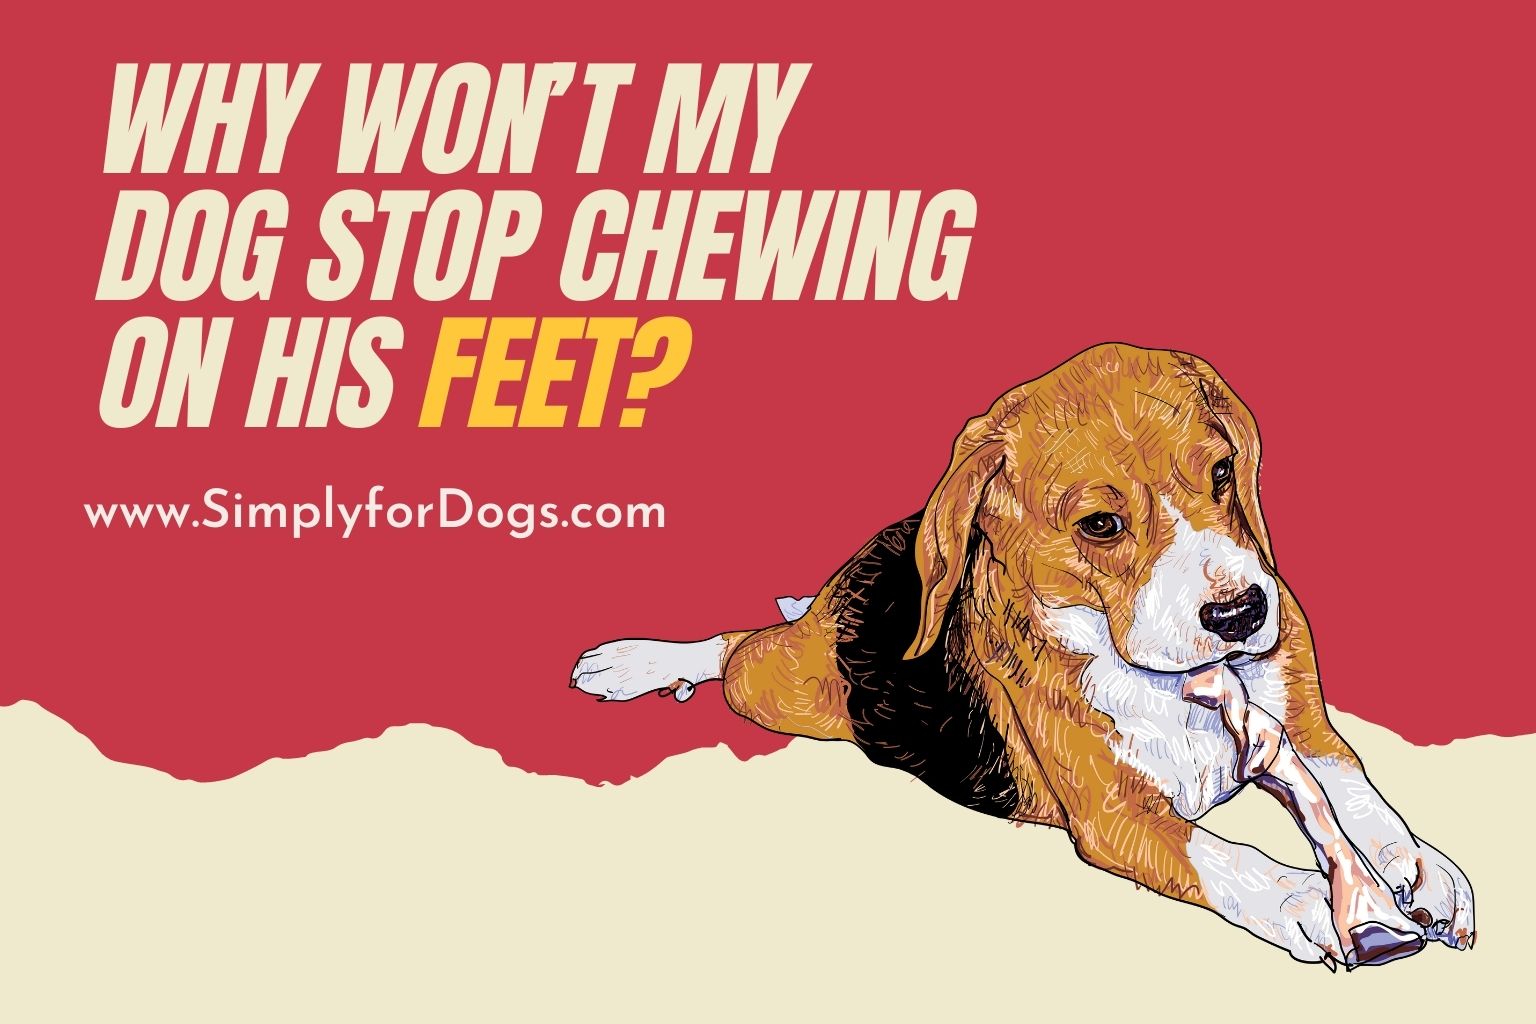 Why Won’t My Dog Stop Chewing on His Feet_